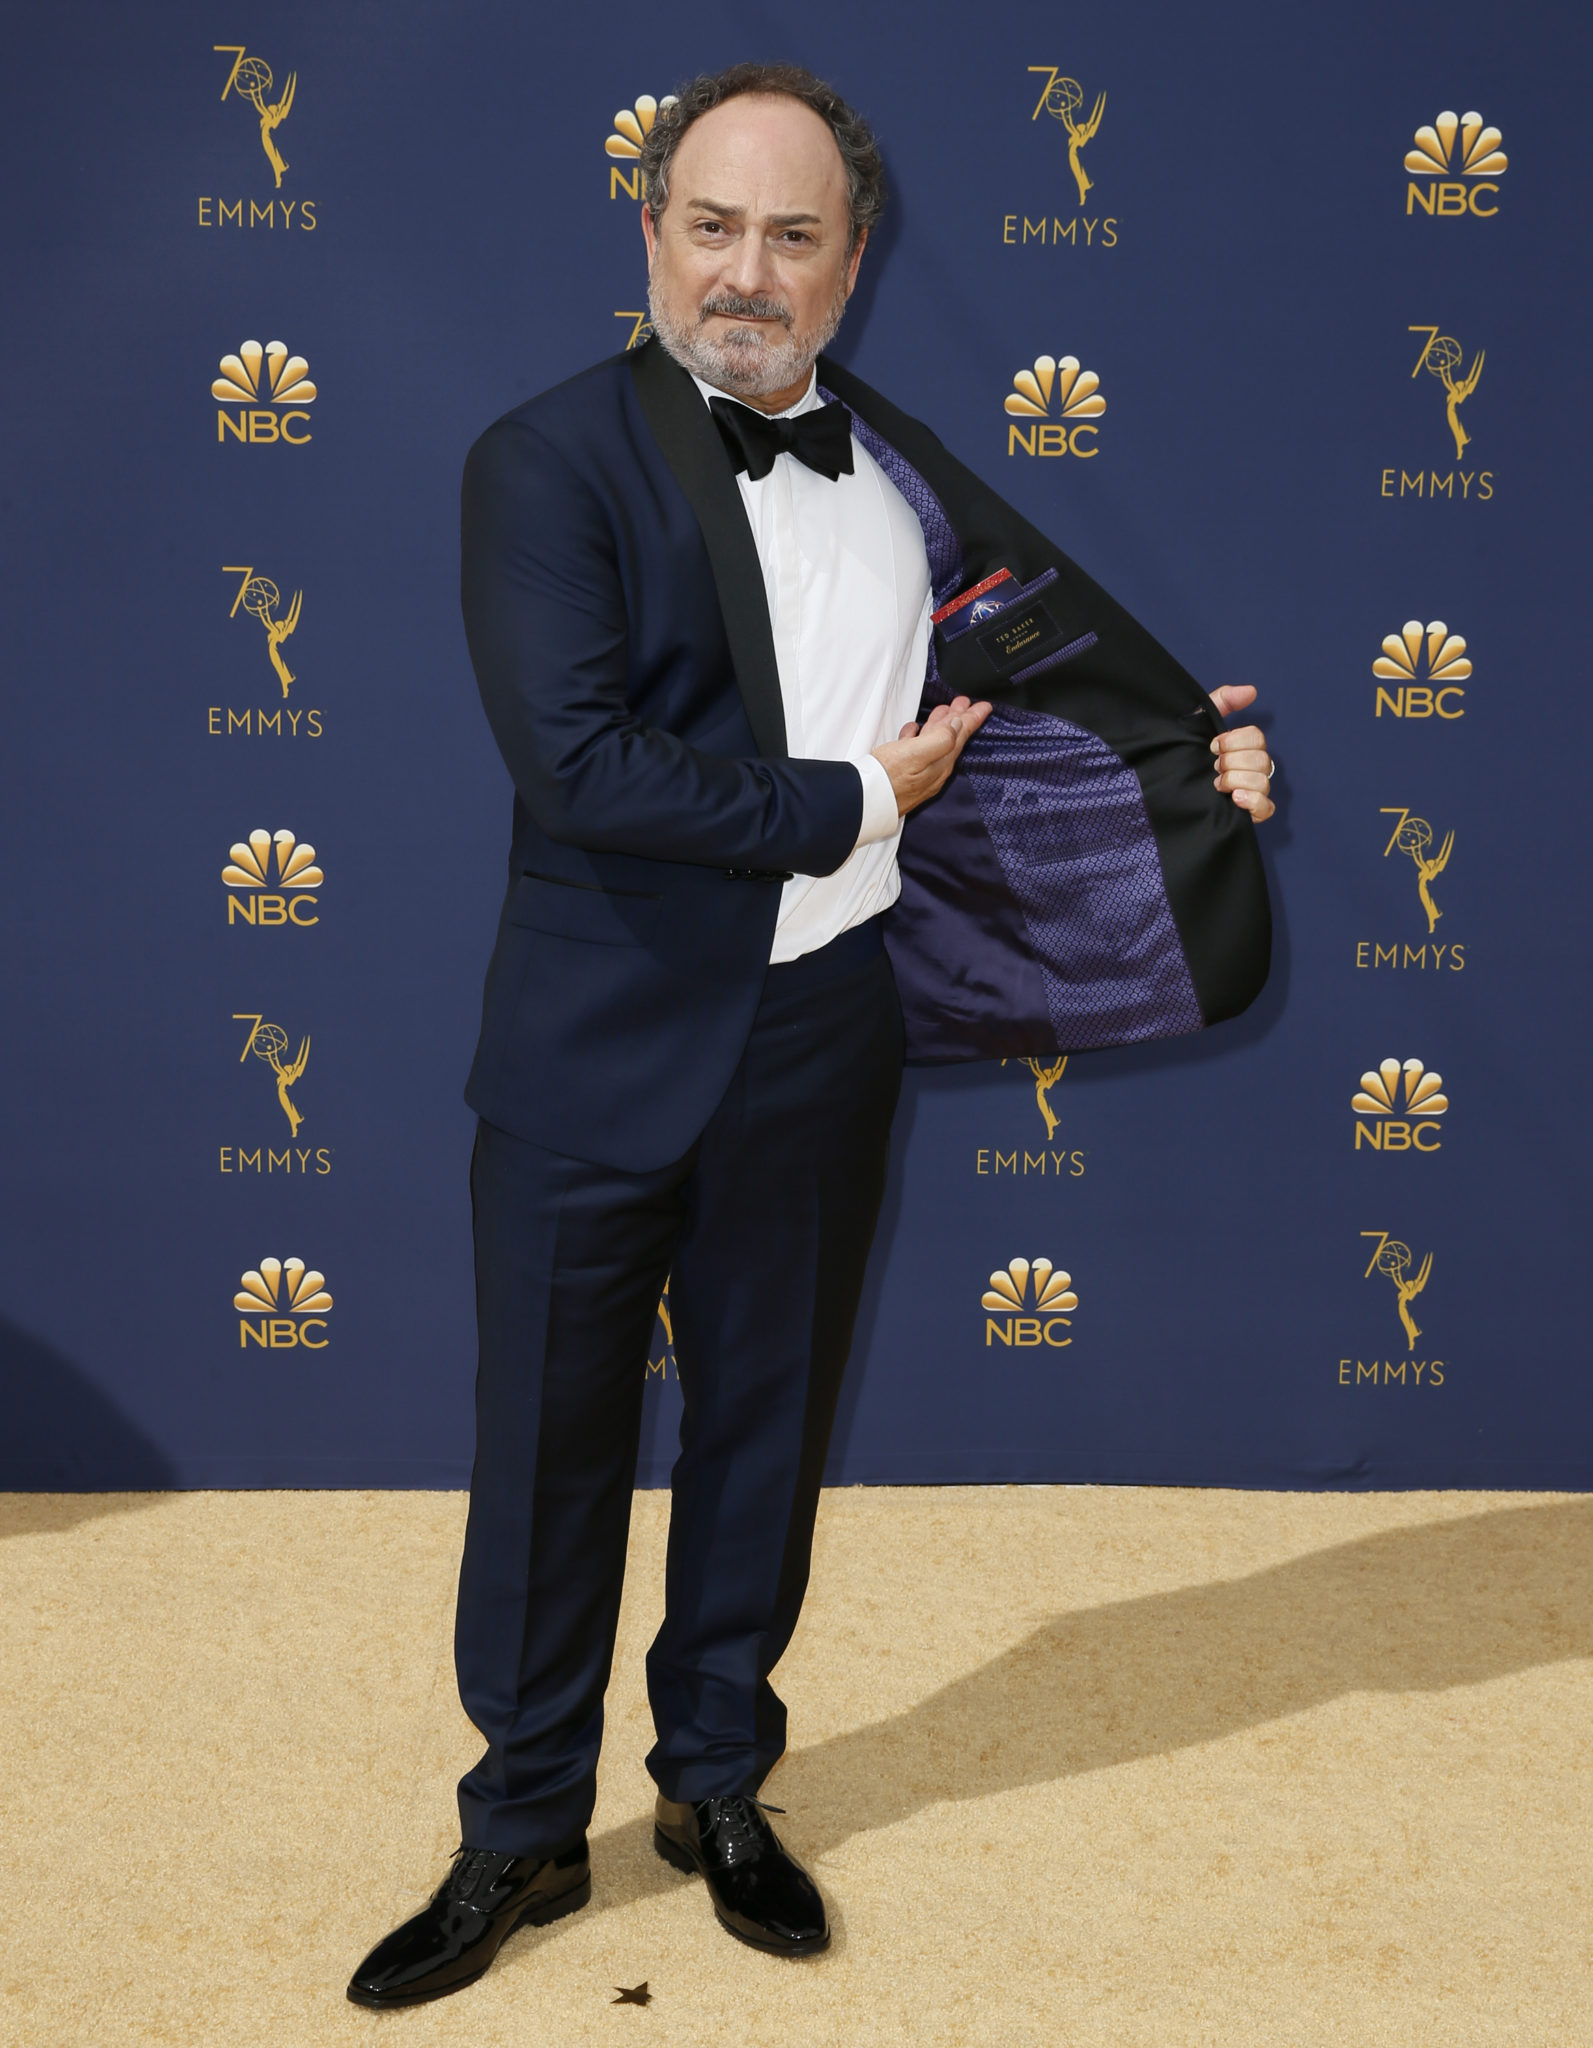 Kevin Pollak Emmys 4Chion Lifestyle